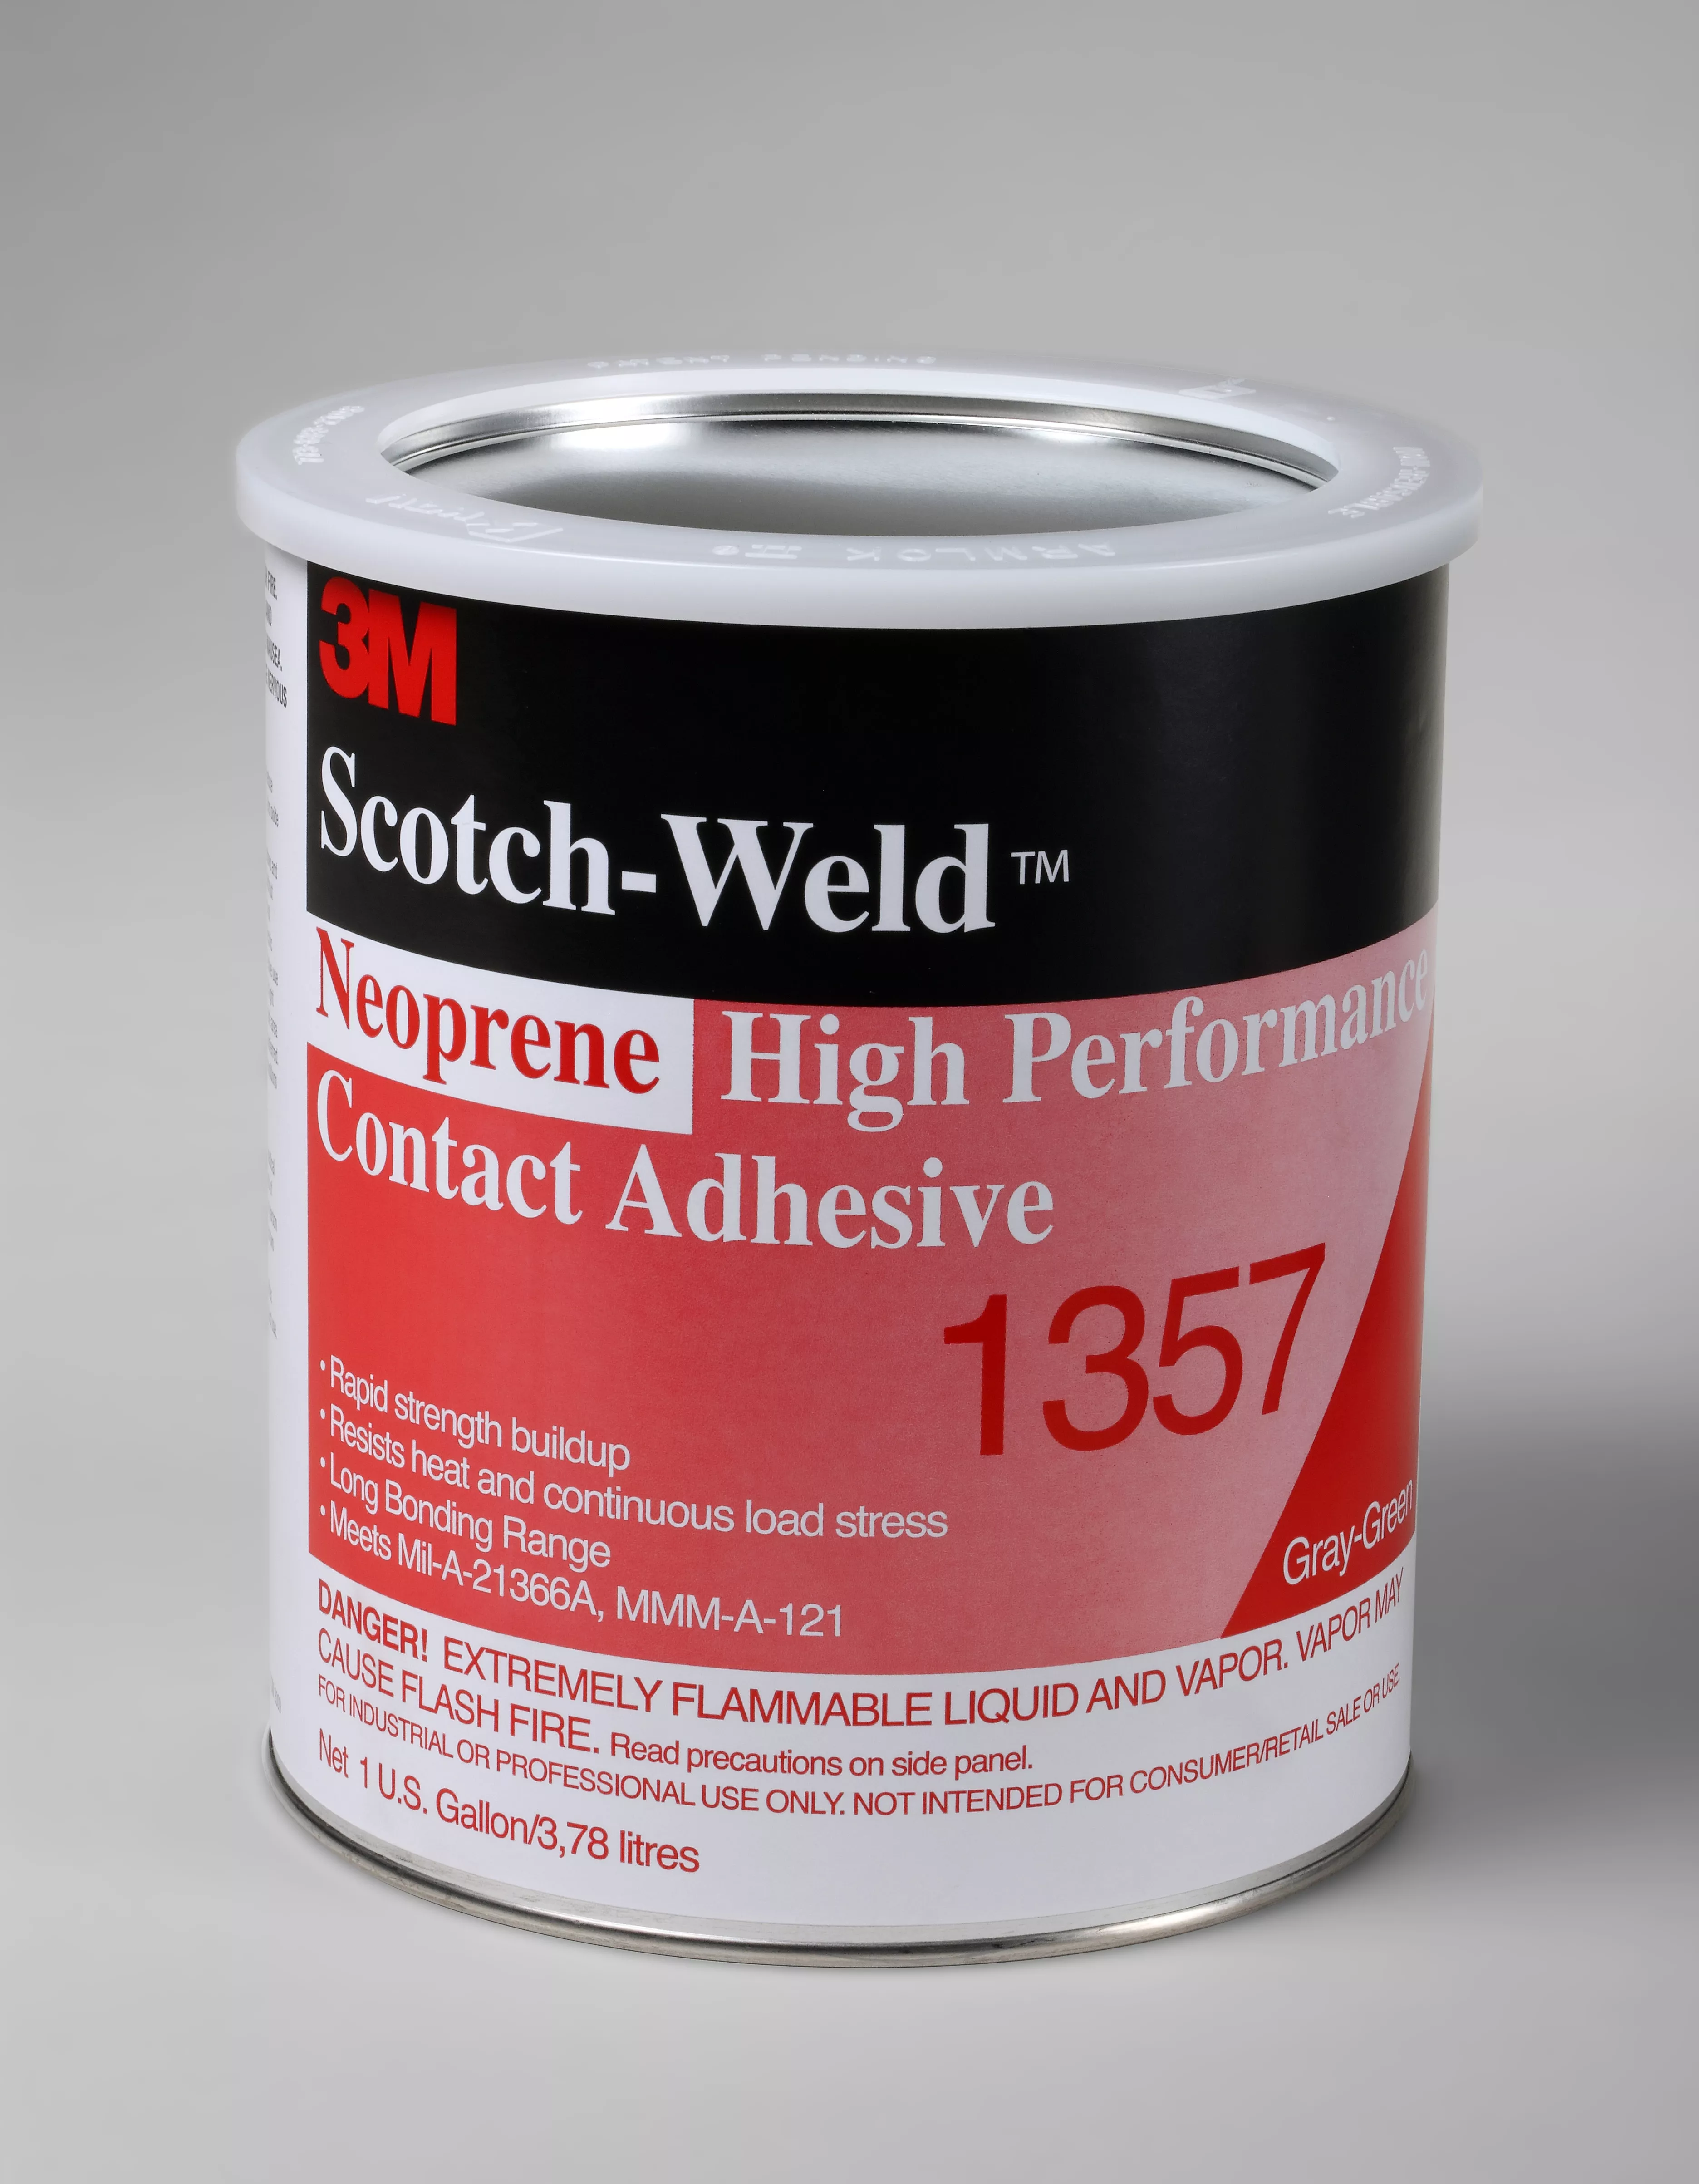 3M™ Neoprene High Performance Contact Adhesive 1357, Gray-Green, 1
Gallon, 4 Can/Case